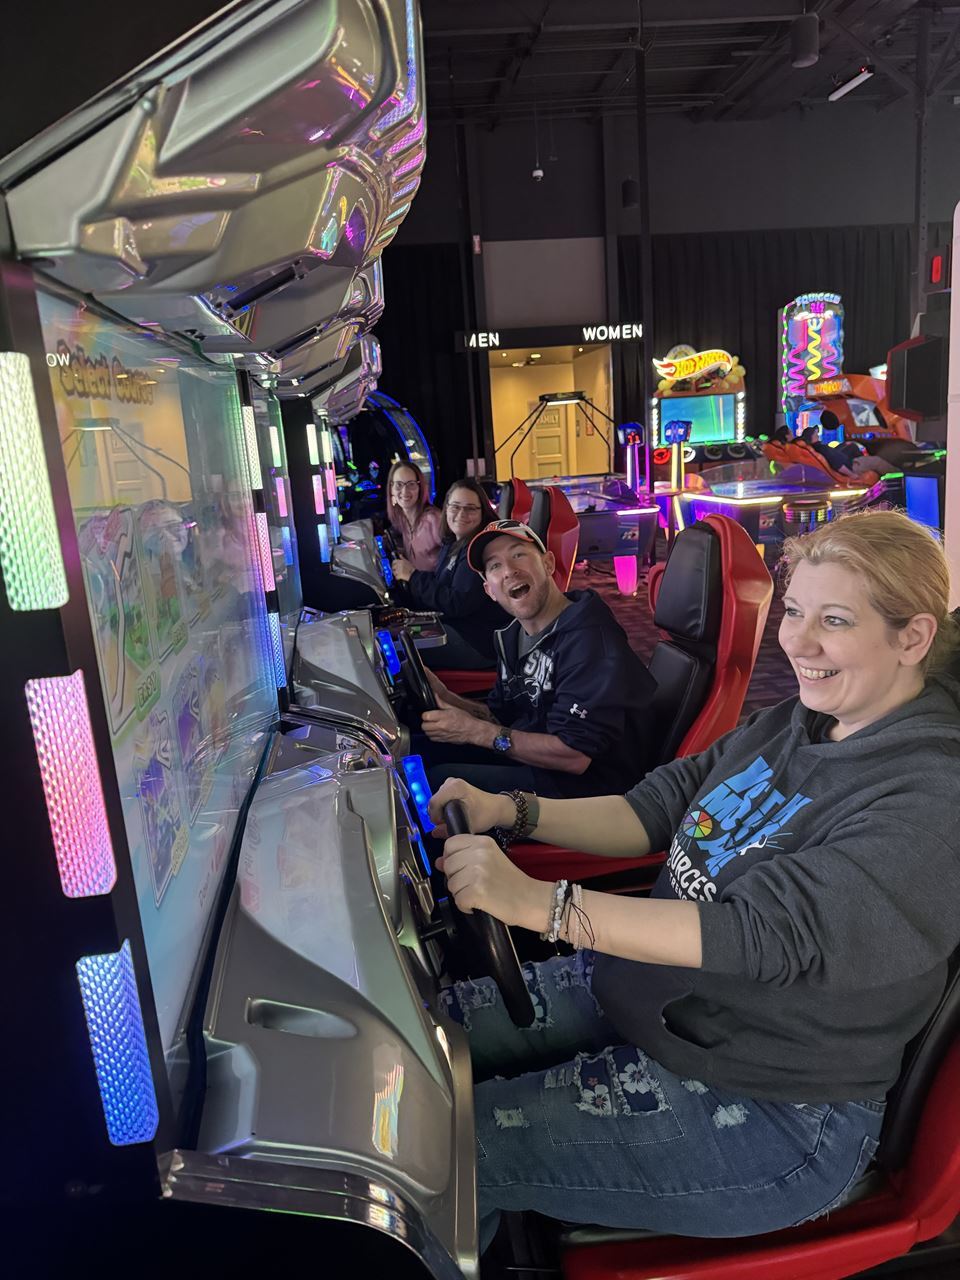 A group of people at an arcade